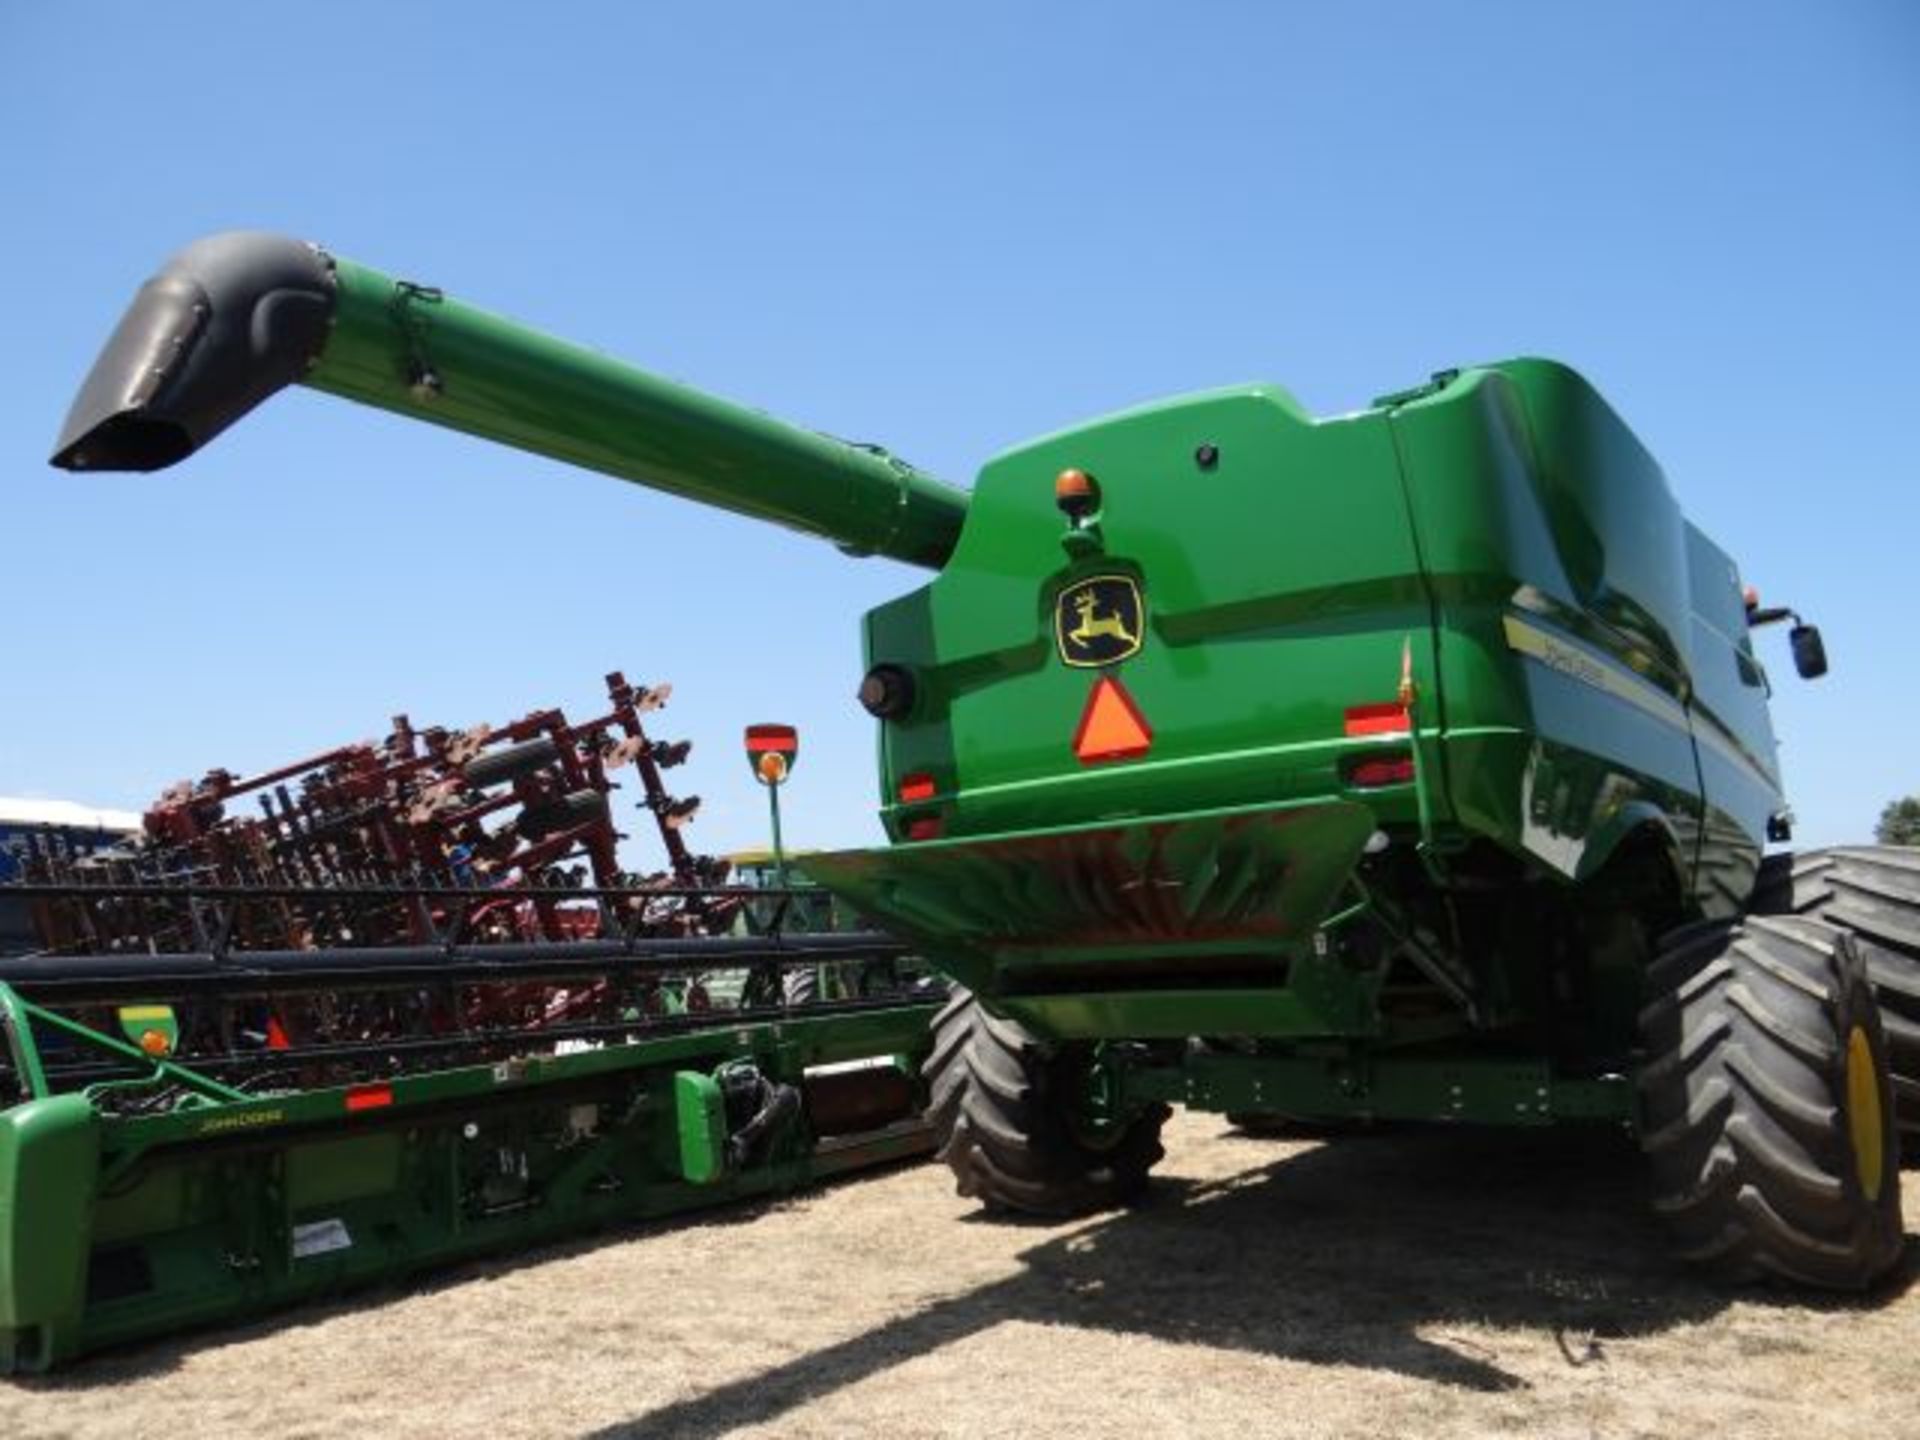 JD S680 Combine, 2012 #150819, 1299/956 hrs, PRWD, CM, Yield Monitor, Yield Mapping, Long - Image 3 of 6